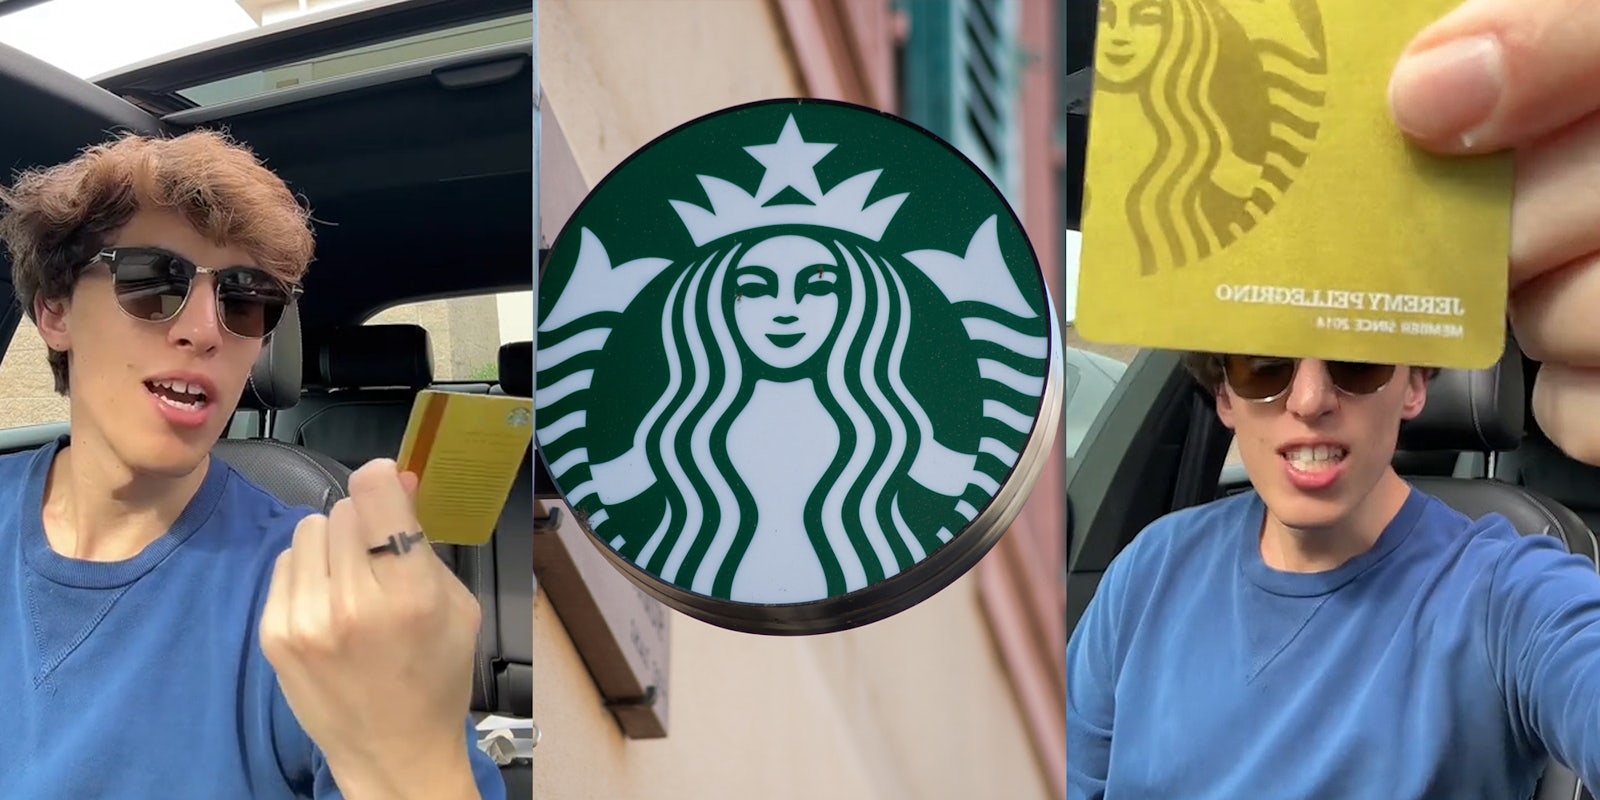 Starbucks customer speaking in car while holding gold card (l) circular Starbucks sign on wall (c) Starbucks customer speaking in car while holding gold card (r)